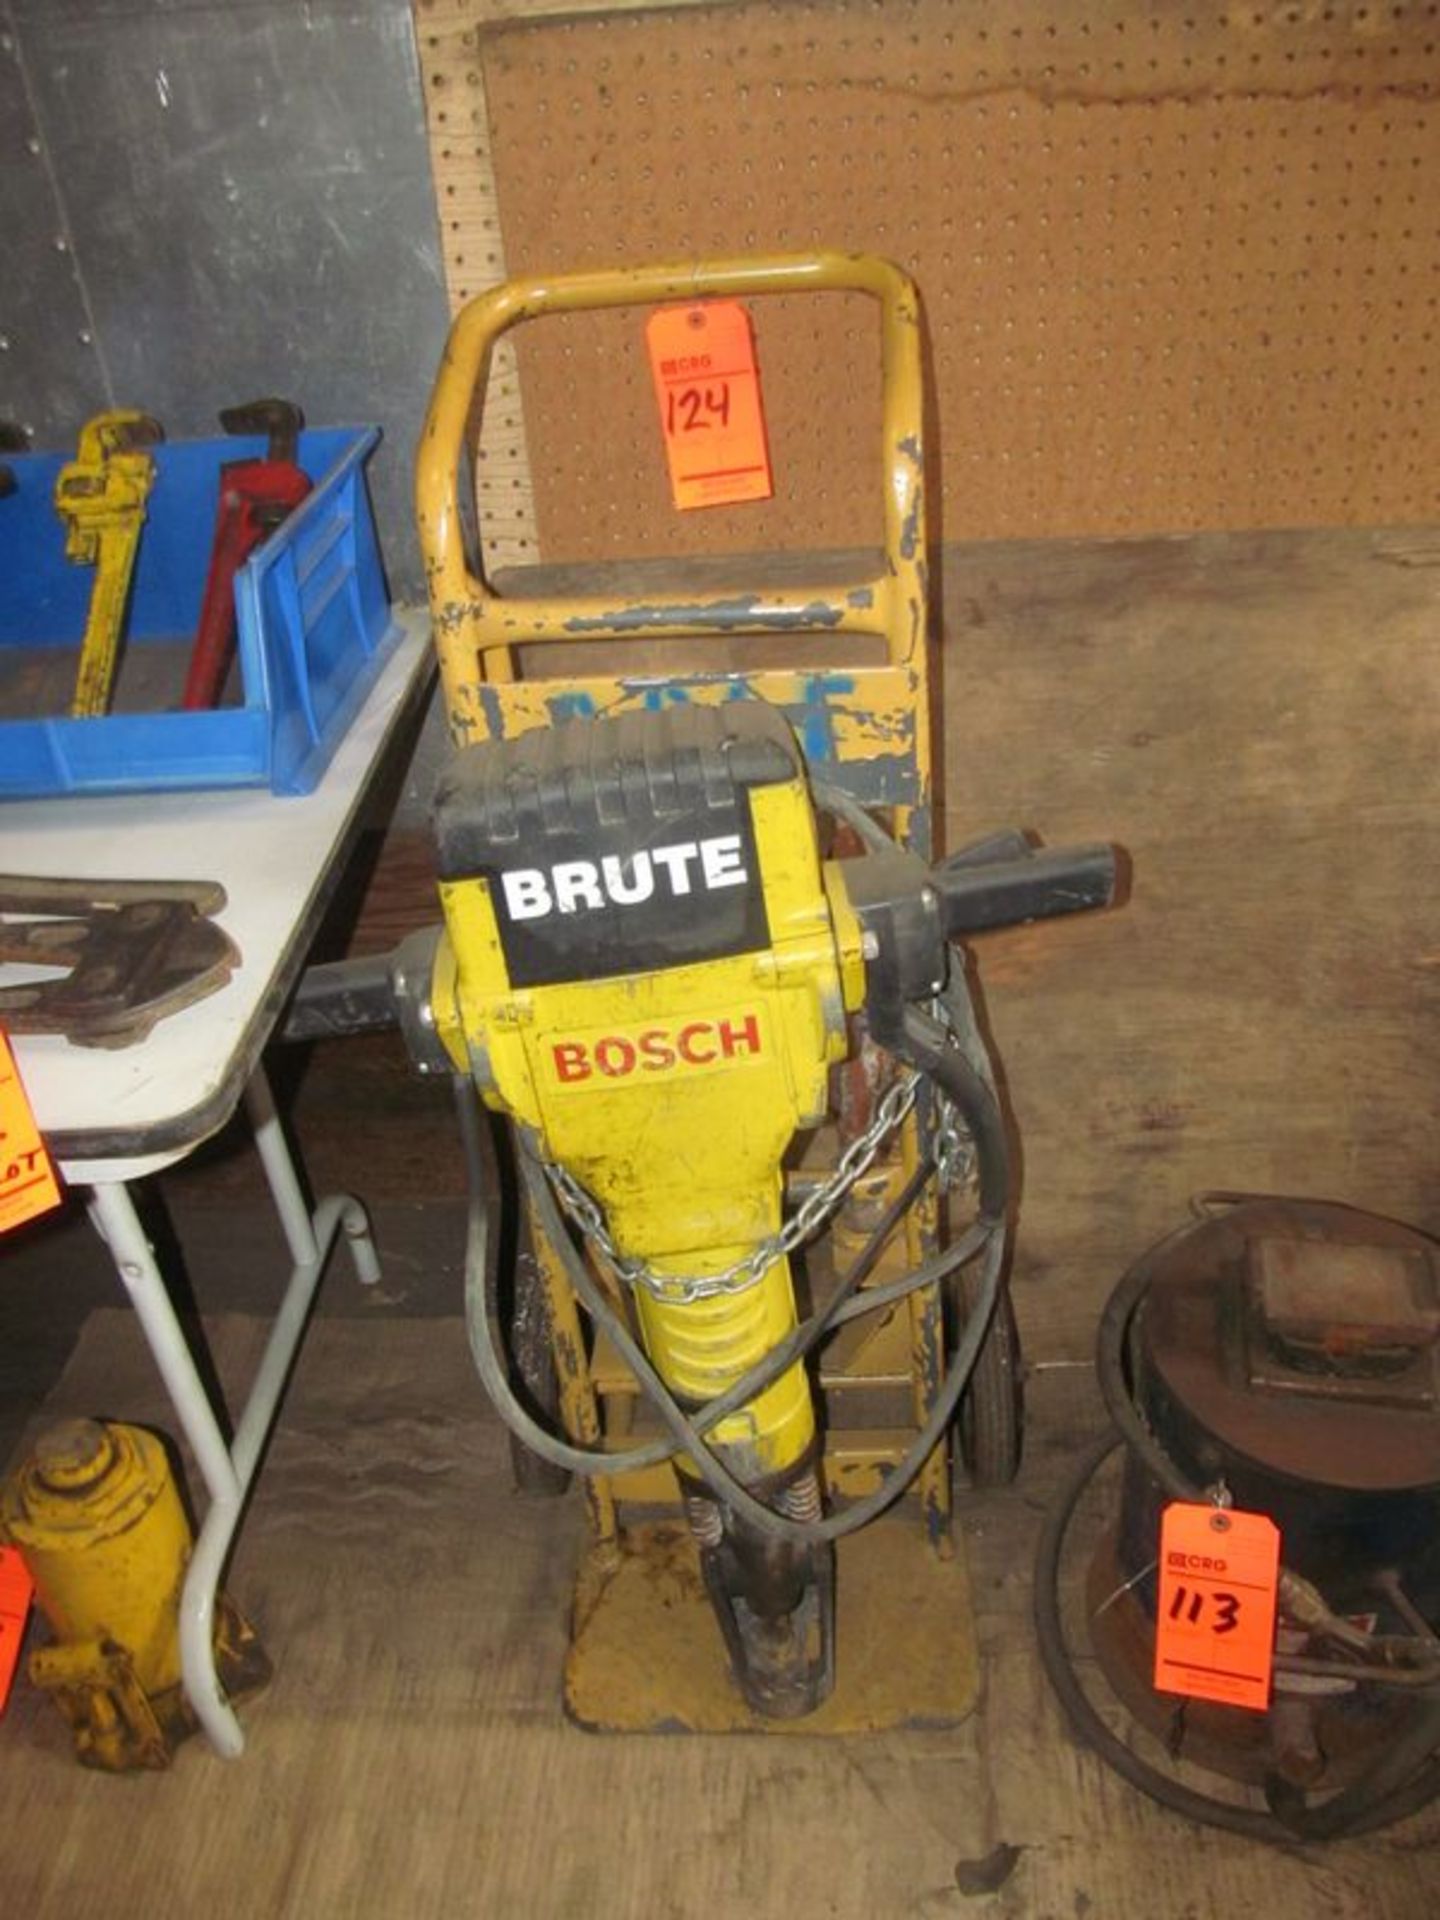 Bosch Brute jackhammer with (4) bits and cart